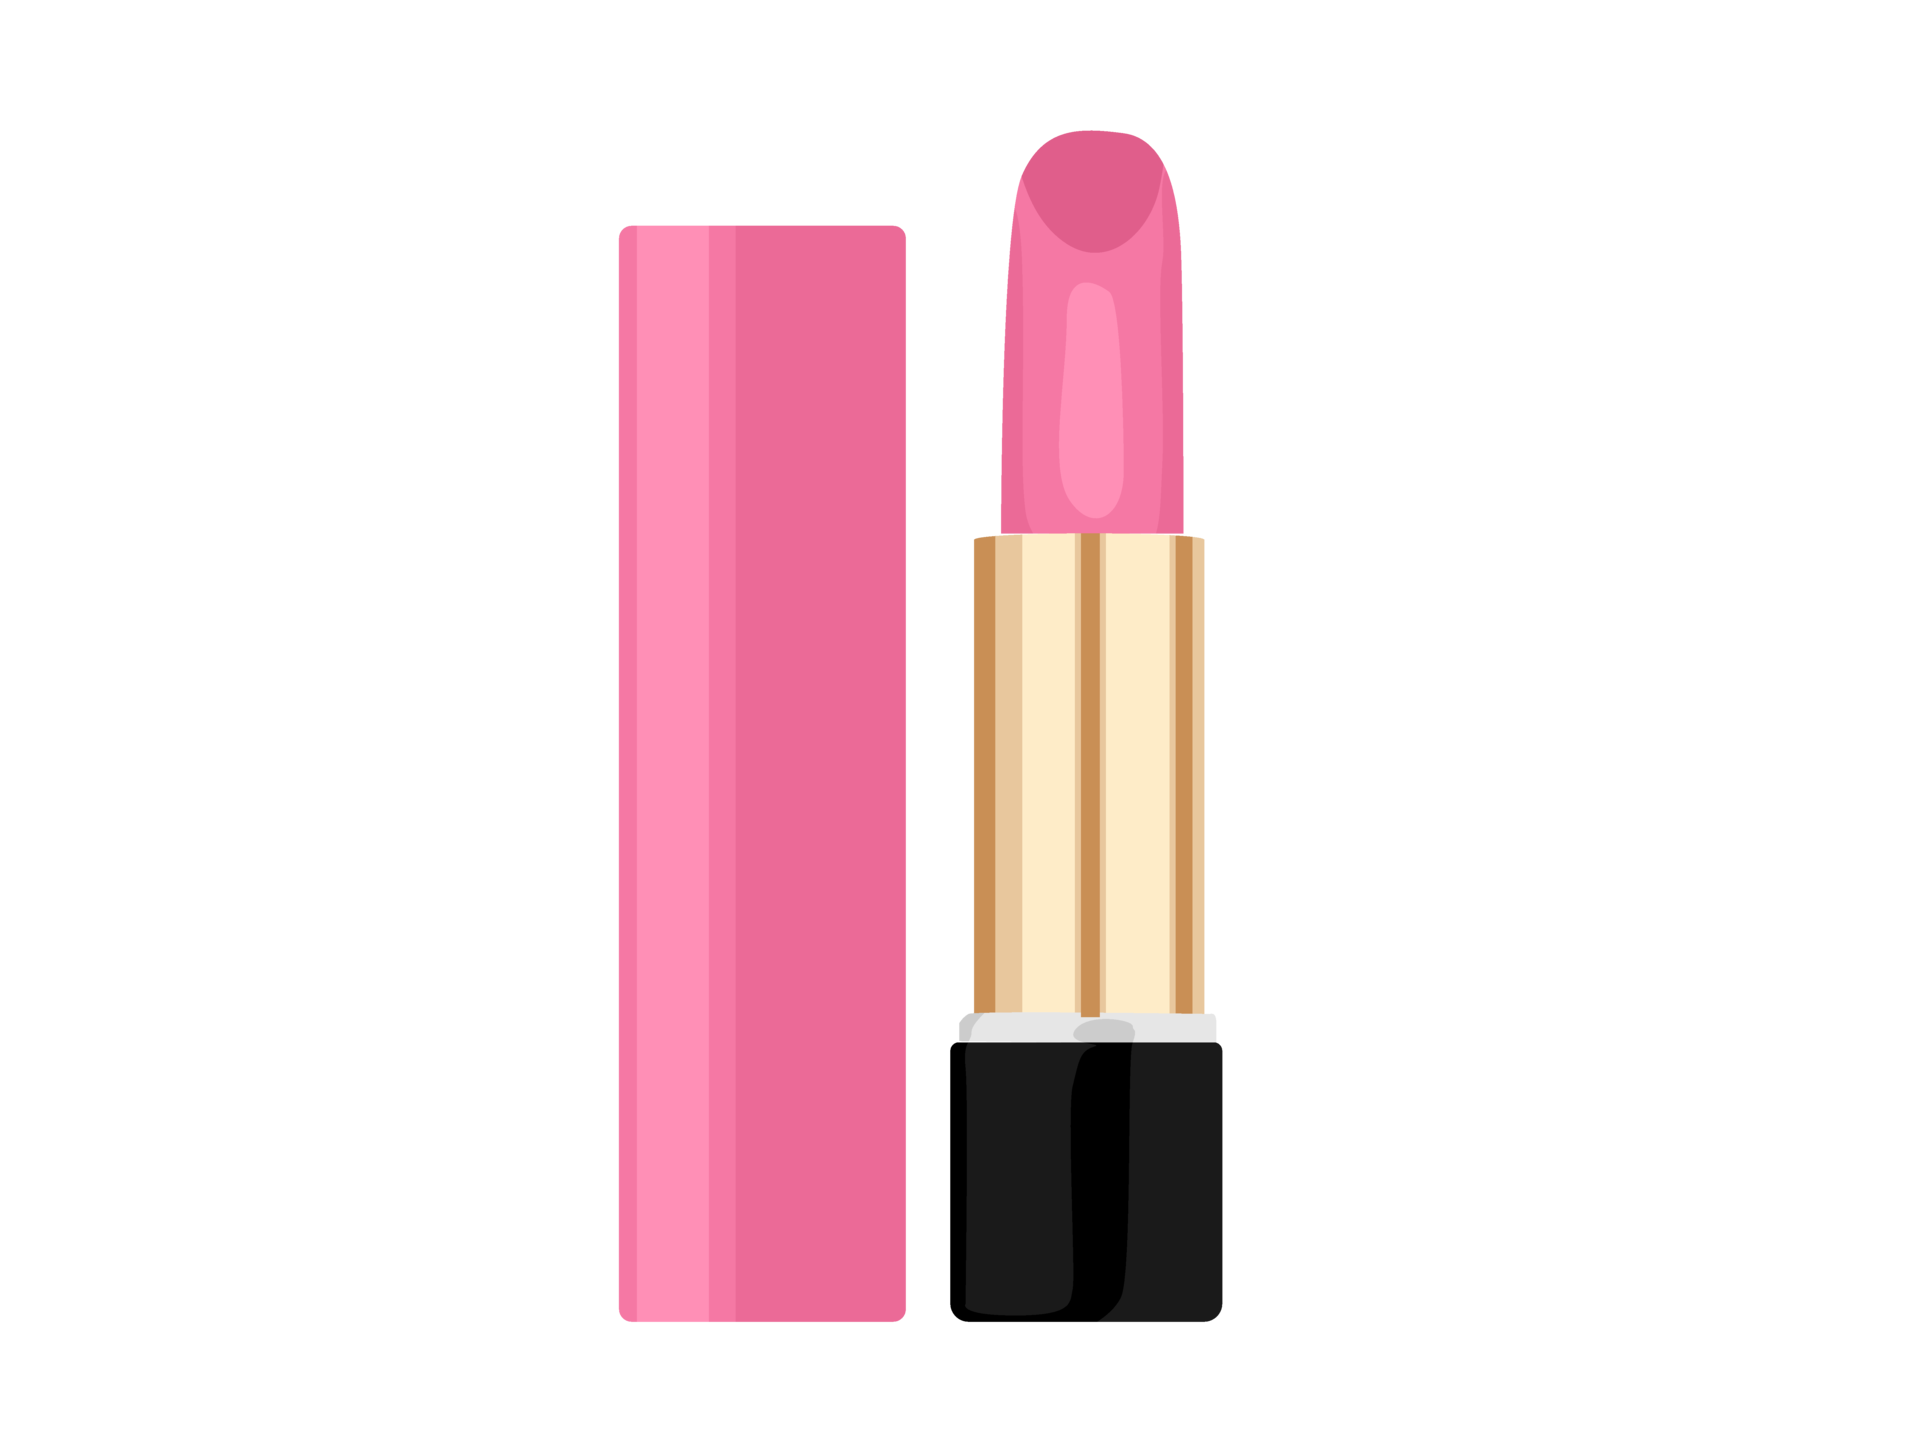 Lipstick PNG Free Images with Transparent Background - (316 Free Downloads)